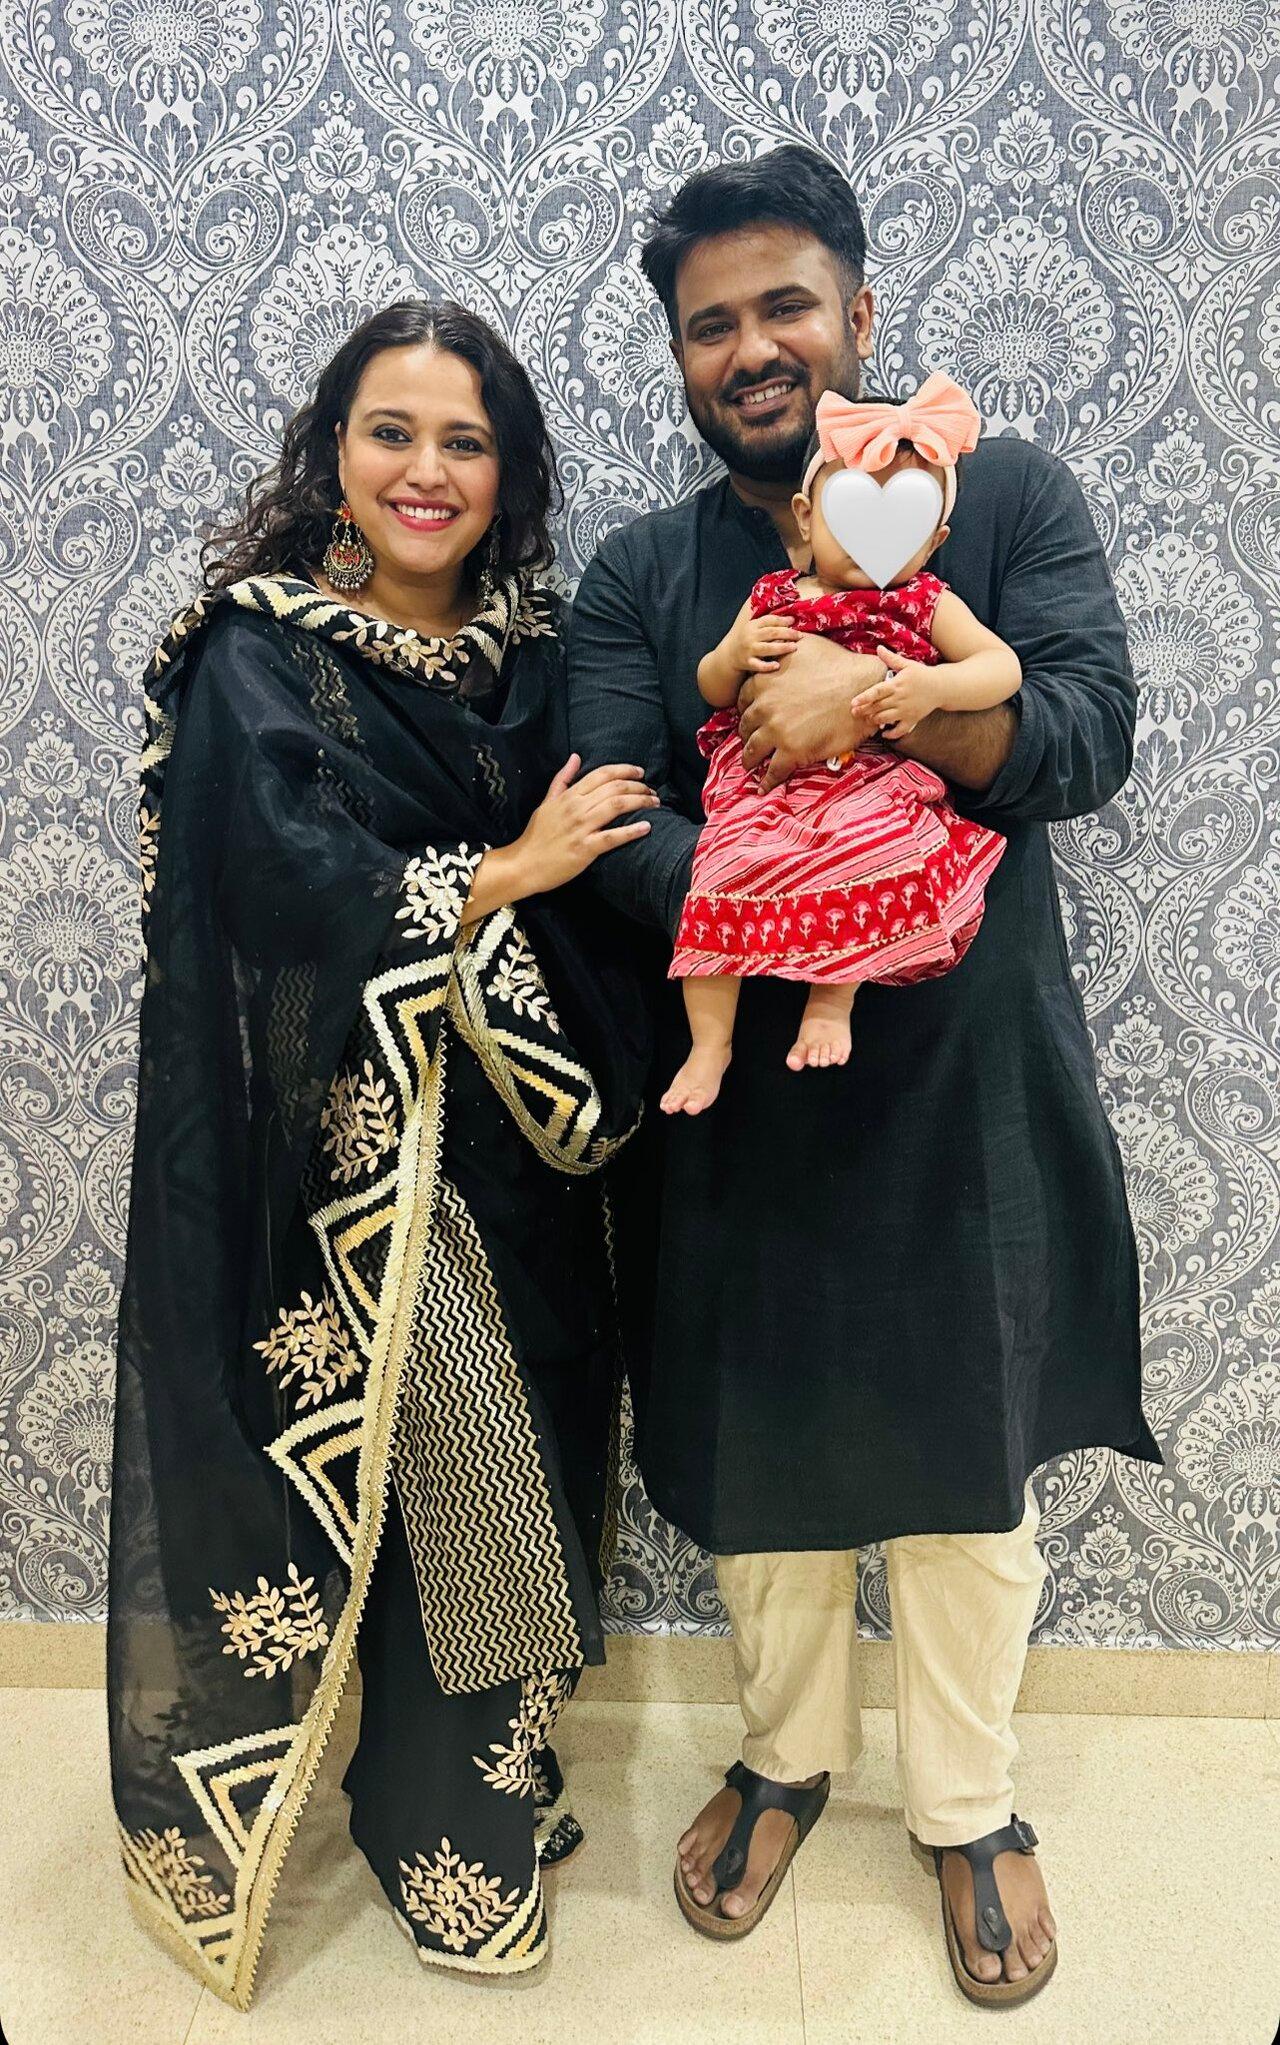 Swara Bhasker and her husband Fahad Ahmad welcomed their baby girl in September last year. She shared pictures on social media giving a glimpse of their daughter Raabiyaa's first Eid